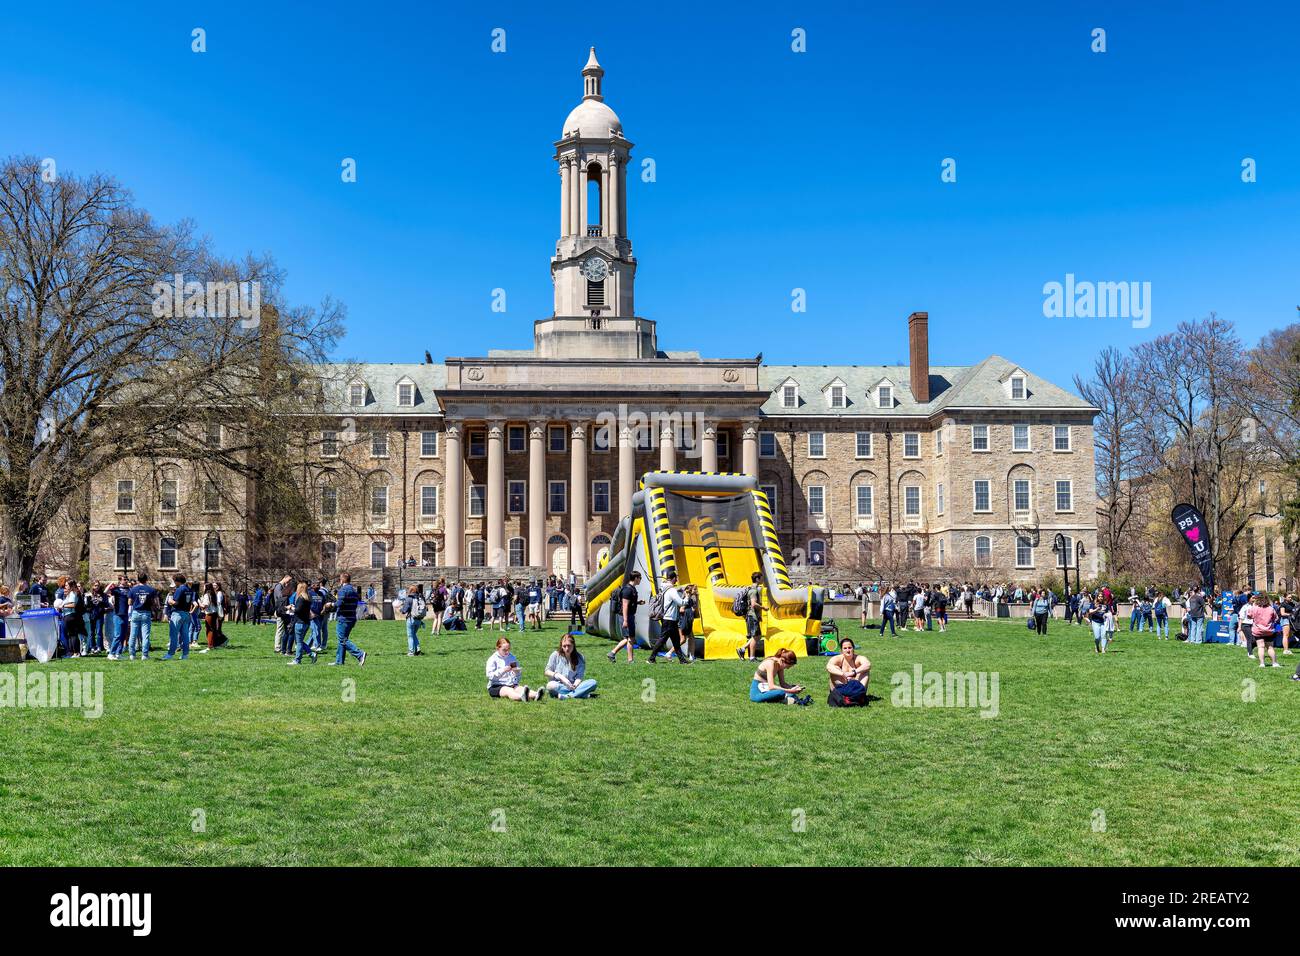 The Old Main building on the campus of Penn State University Stock Photo